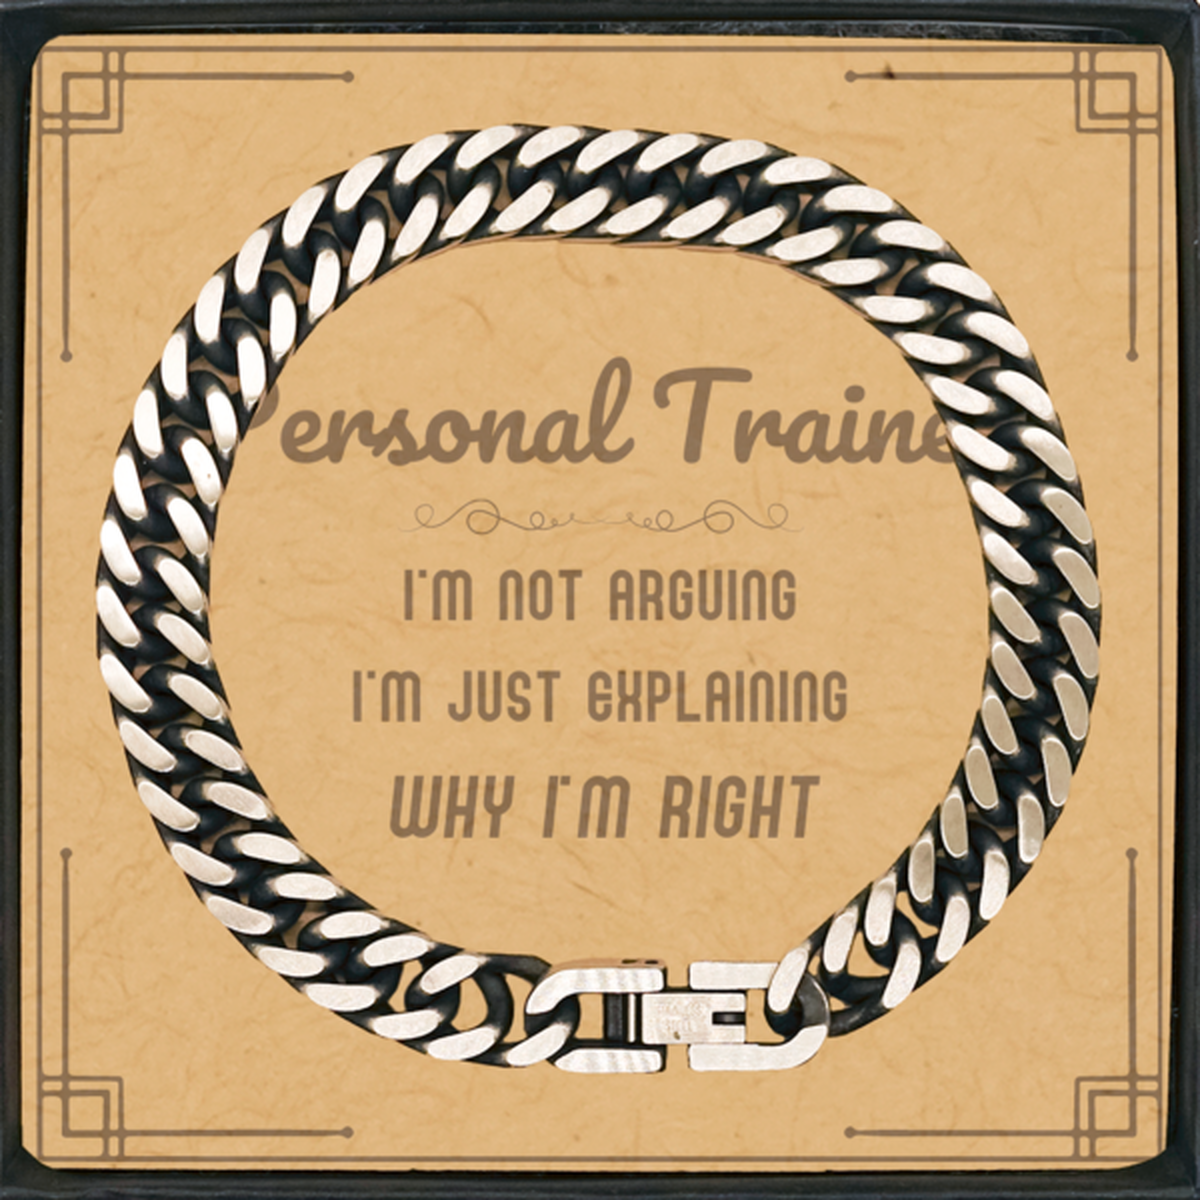 Personal Trainer I'm not Arguing. I'm Just Explaining Why I'm RIGHT Cuban Link Chain Bracelet, Funny Saying Quote Personal Trainer Gifts For Personal Trainer Message Card Graduation Birthday Christmas Gifts for Men Women Coworker